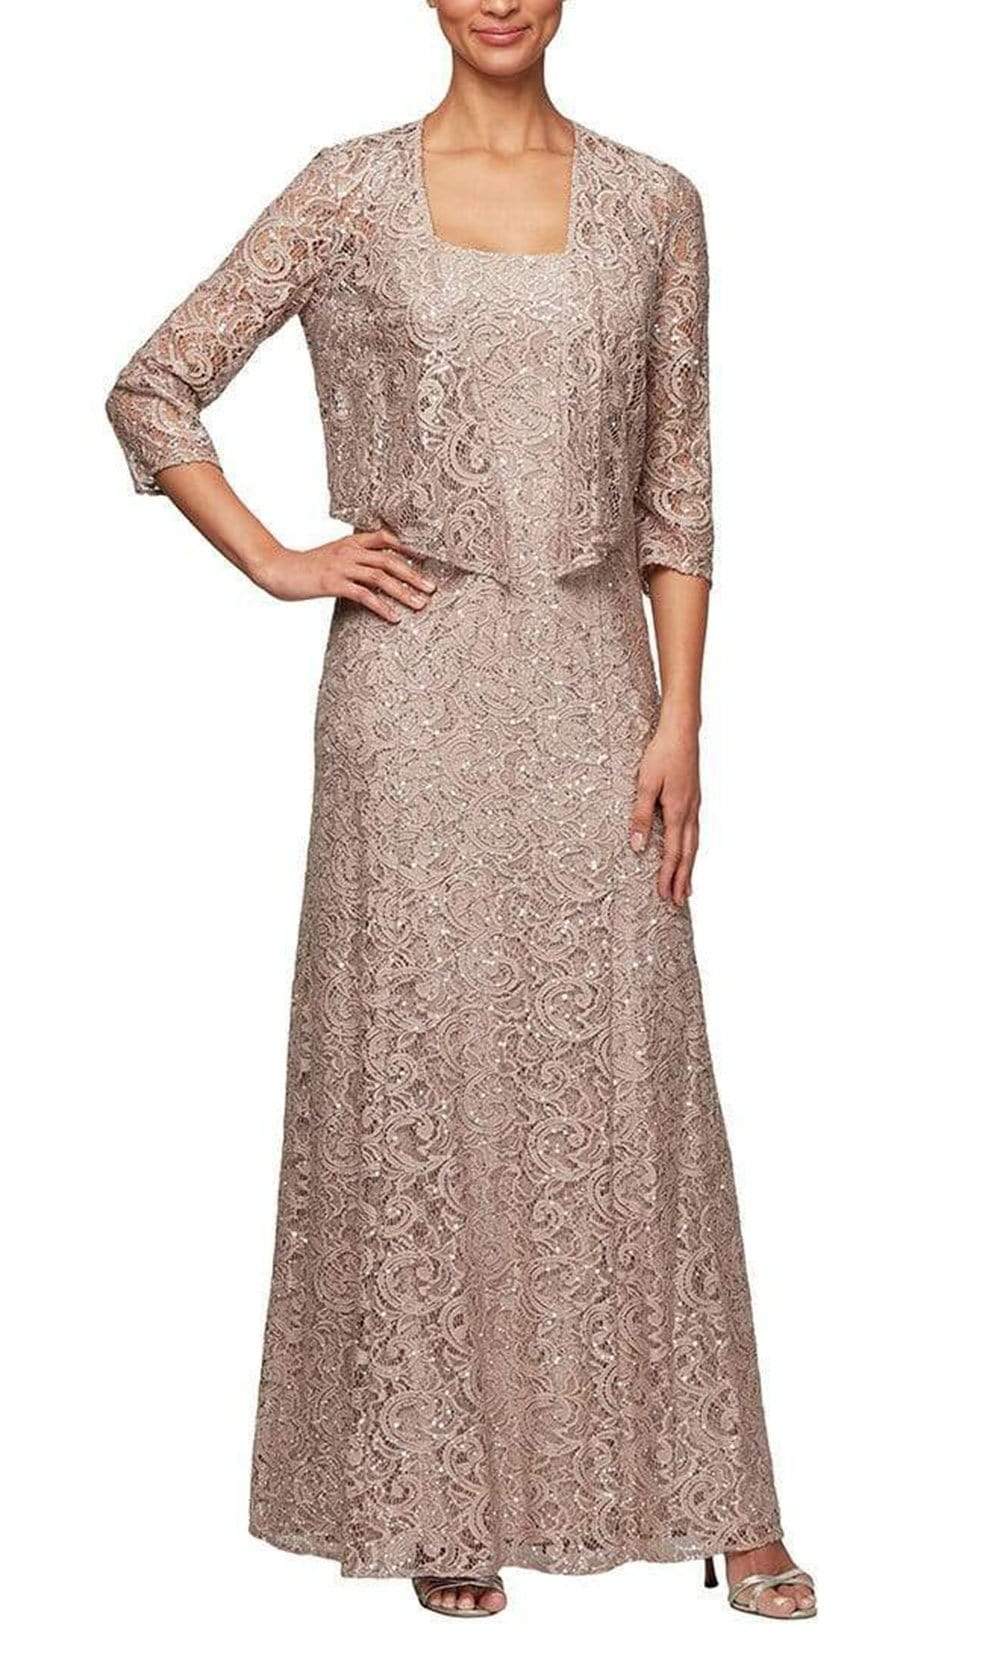 Image of Alex Evenings - 1122012 Embroidered Lace A-line Dress